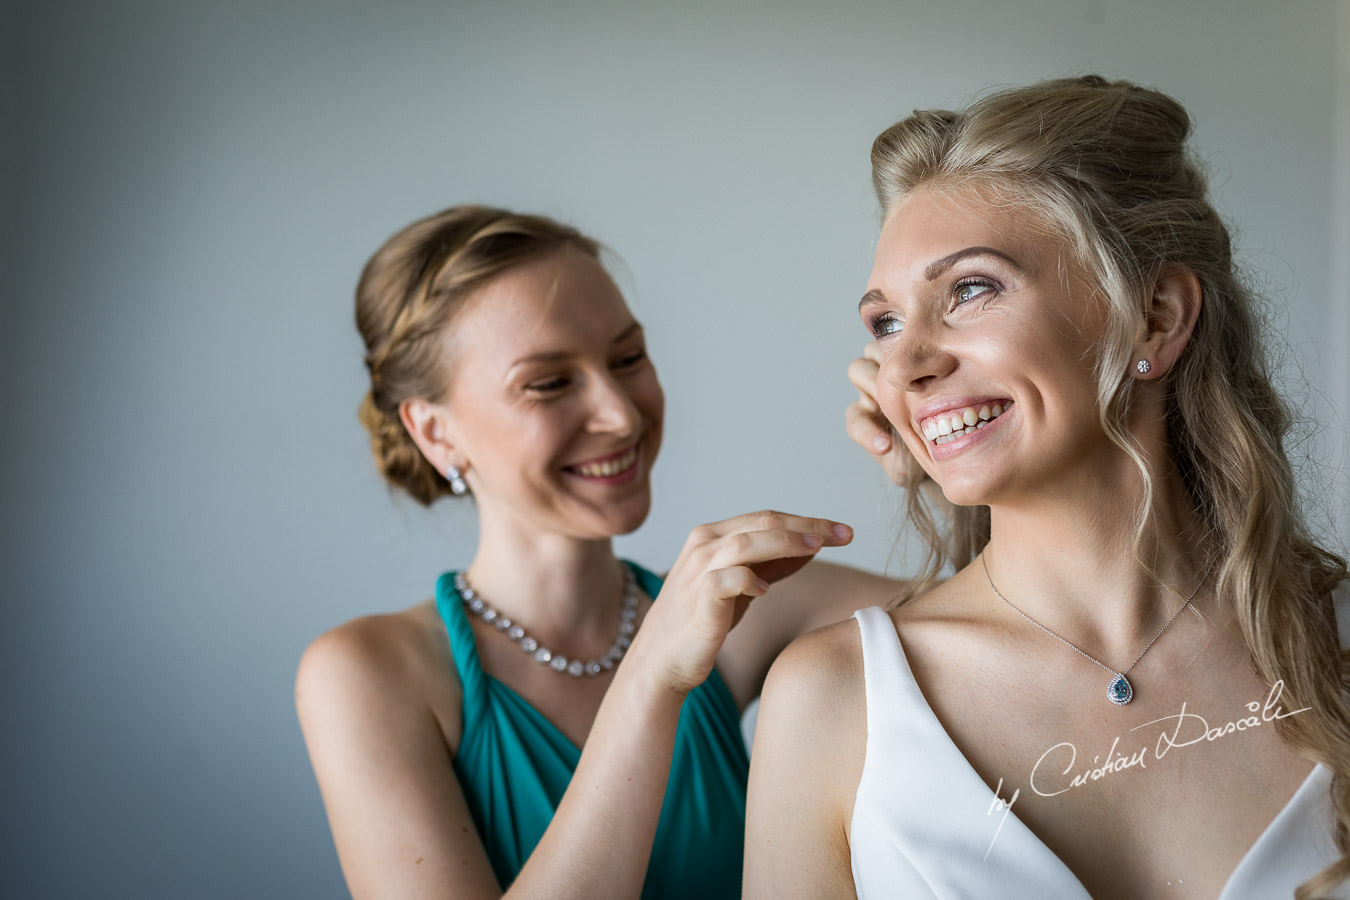 Maid of Honor helping the bride to get ready, moments captured during an Exquisite Wedding at Asterias Beach Hotel. Photography by Cyprus Photographer Cristian Dascalu.